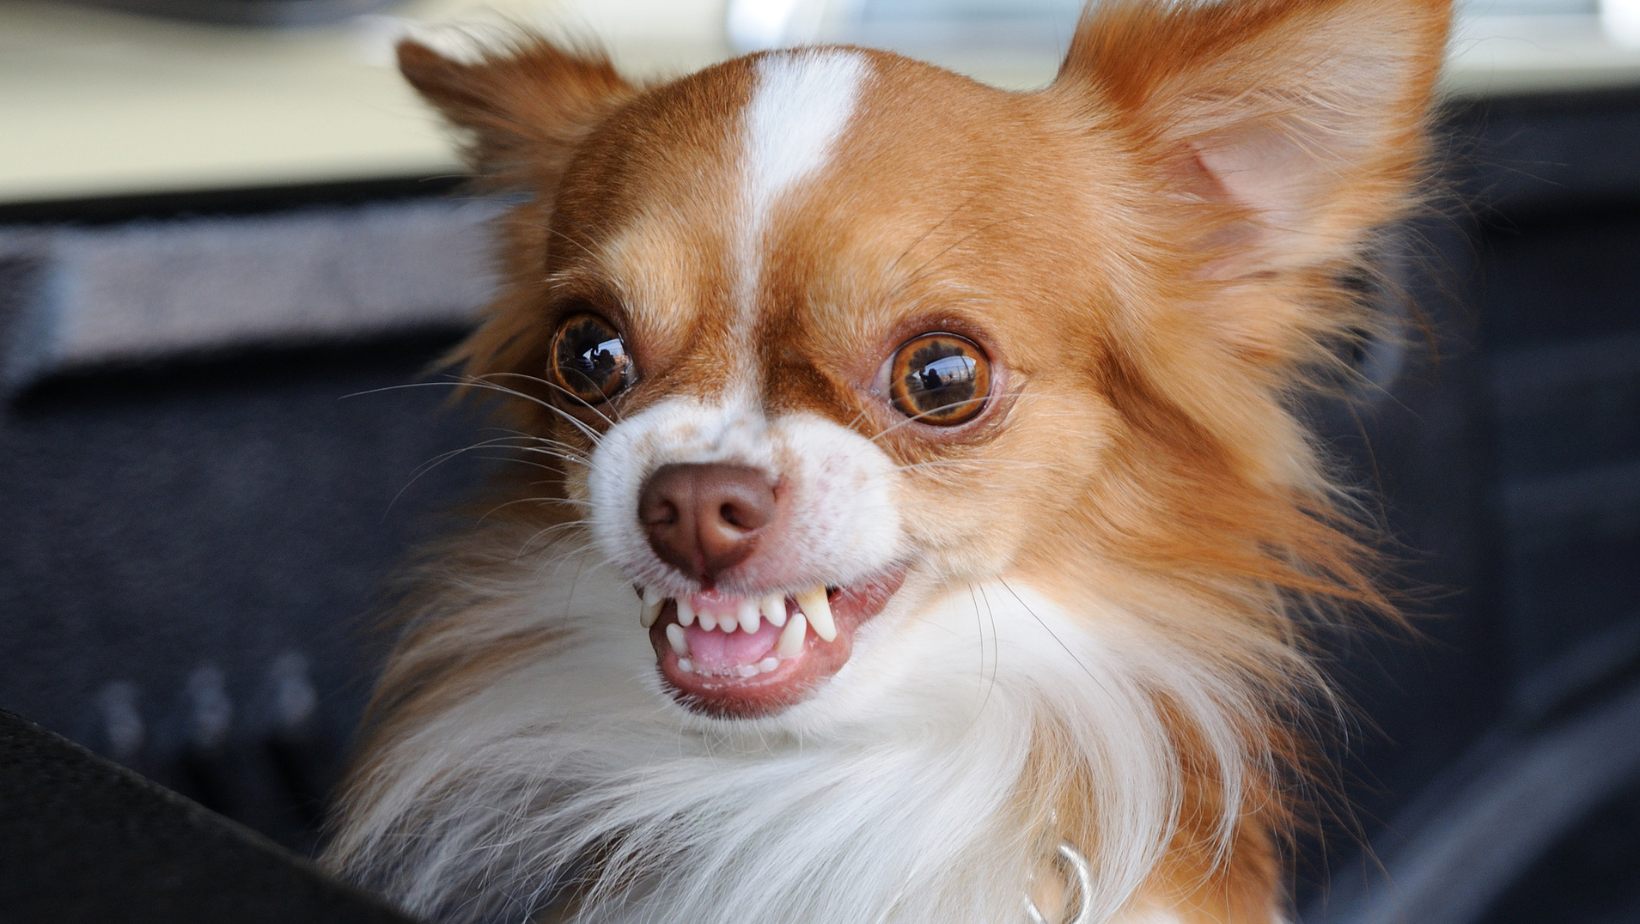 3900 Psi Can't Be Chihuahuas Bite Force, According To Studies